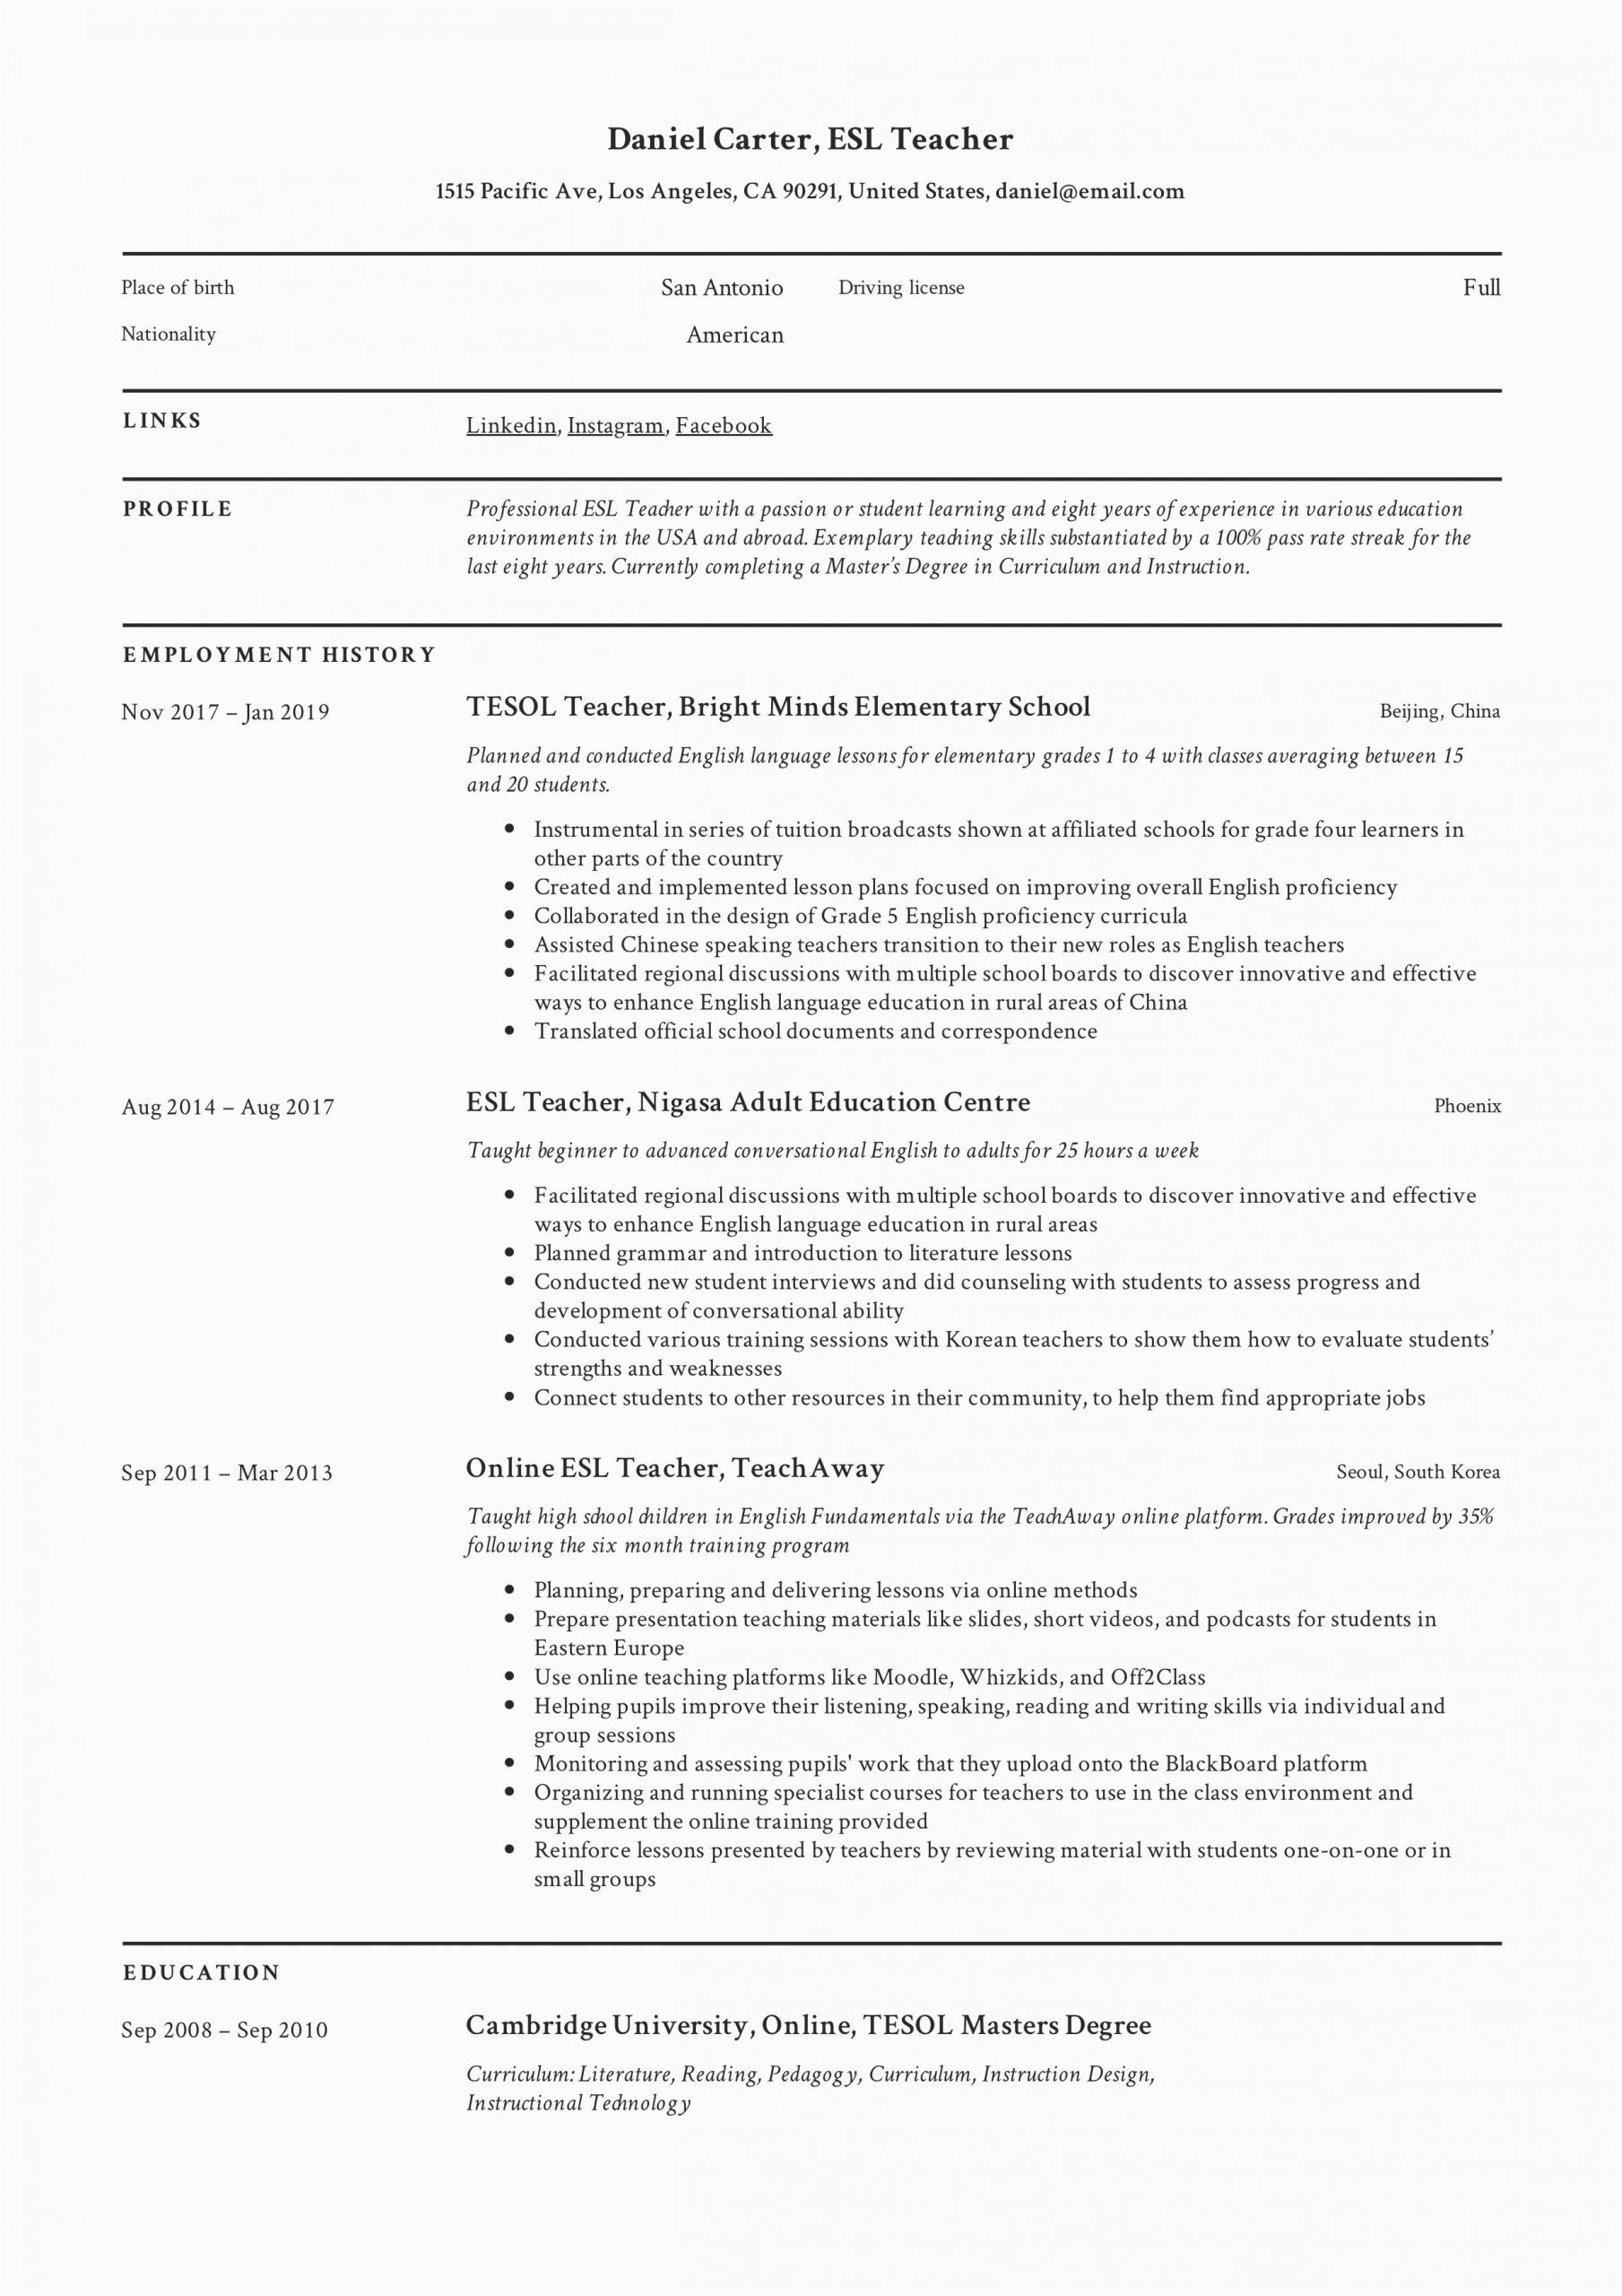 Free Resume Templates for Teaching Positions Esl Teacher Resume Template In 2020